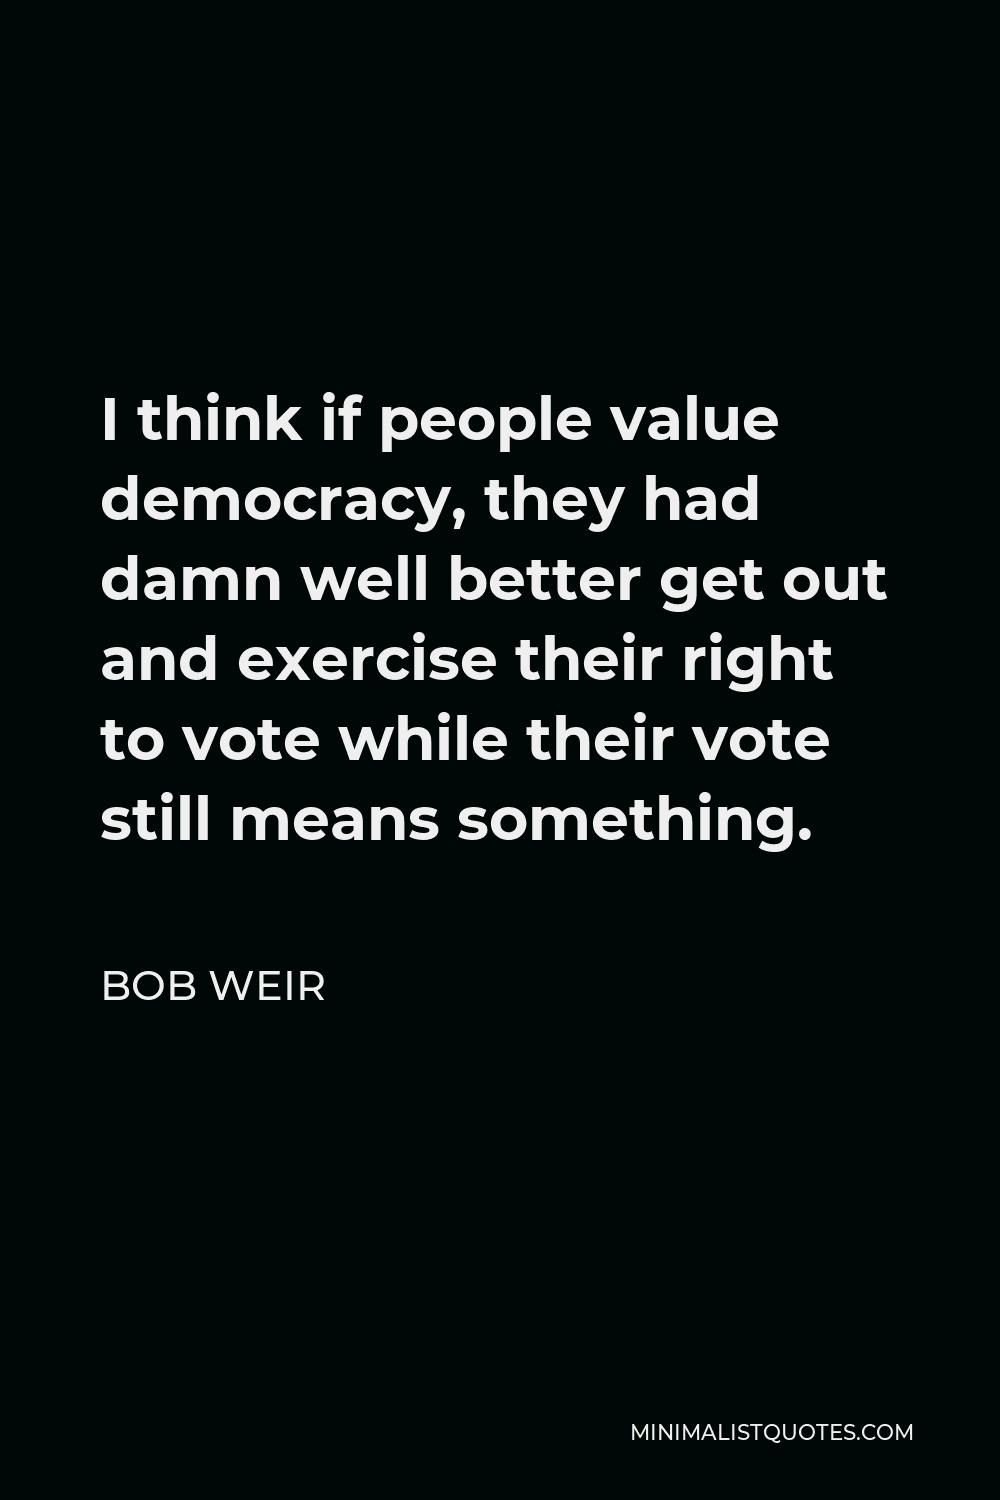 Bob Weir Quote - I think if people value democracy, they had damn well better get out and exercise their right to vote while their vote still means something.